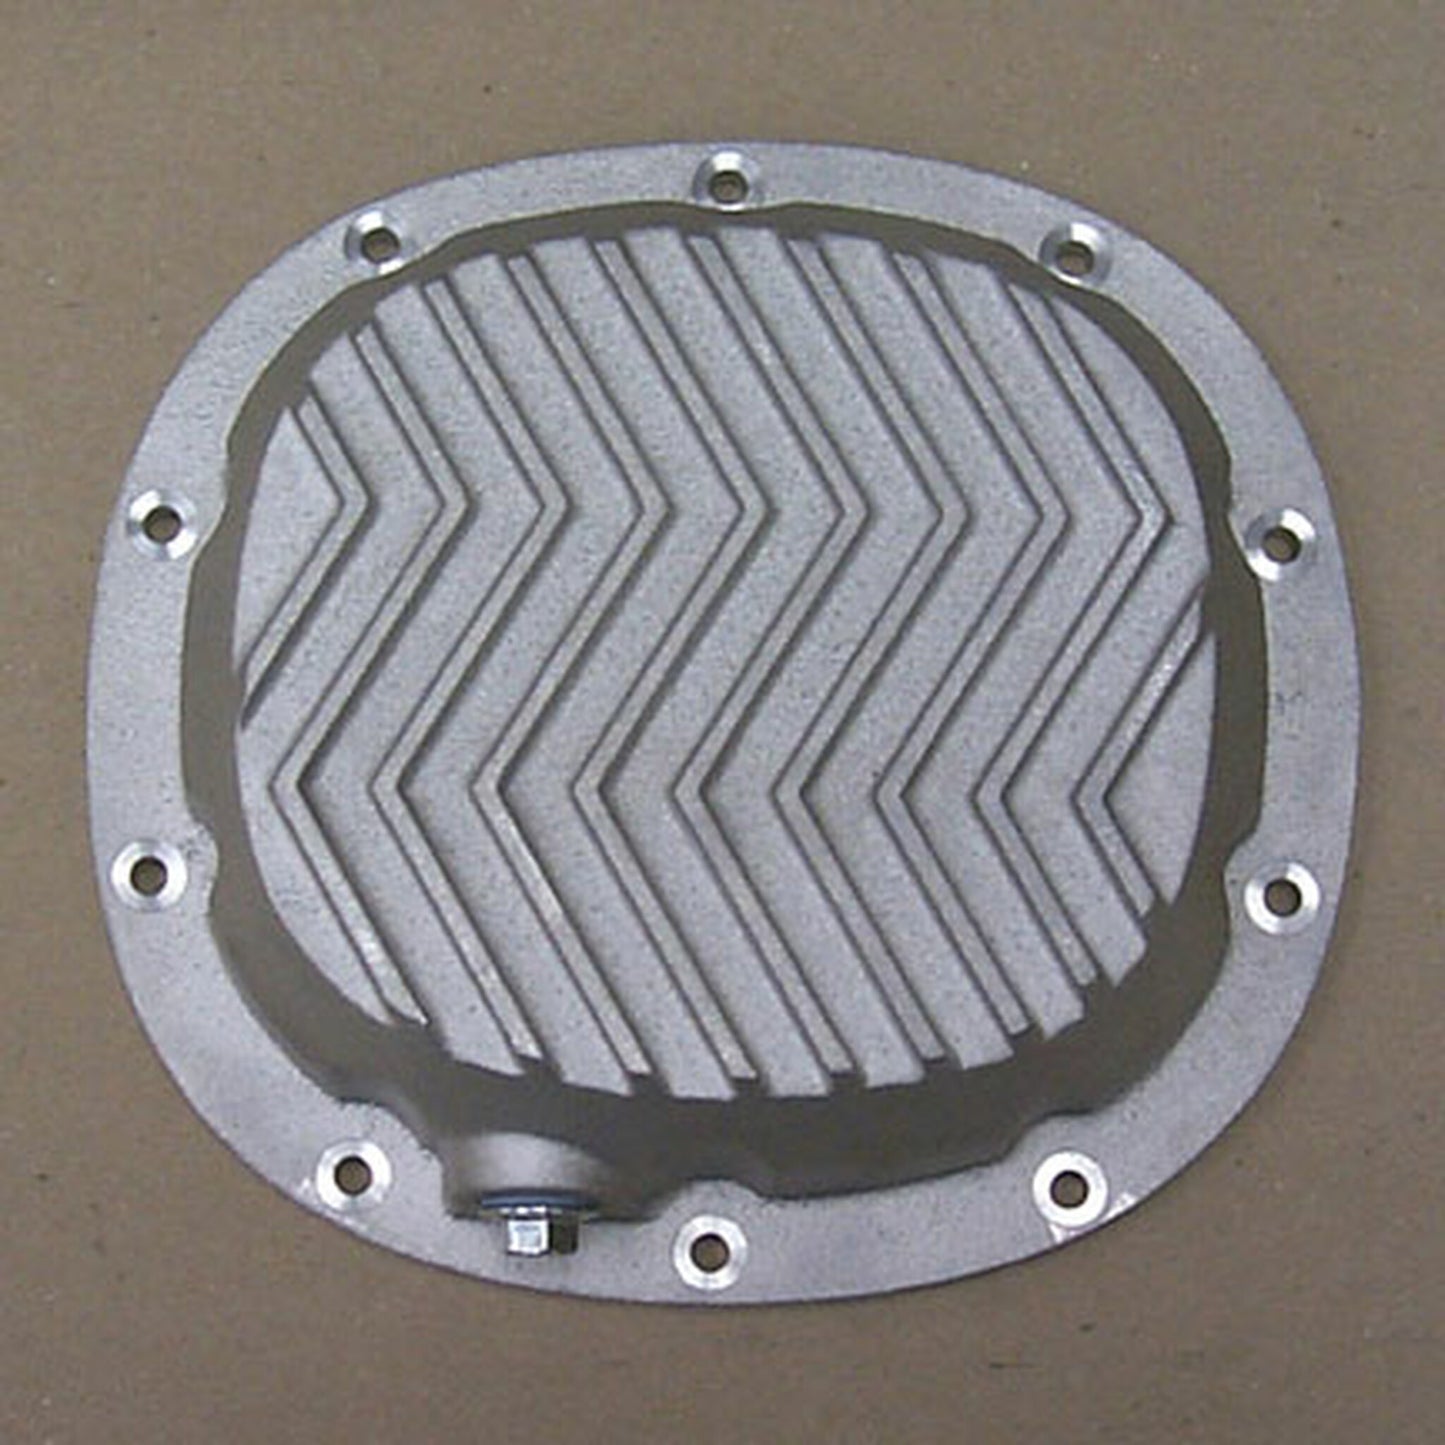 GM 7.5", 7.625" Differential Cover Patterned Fins